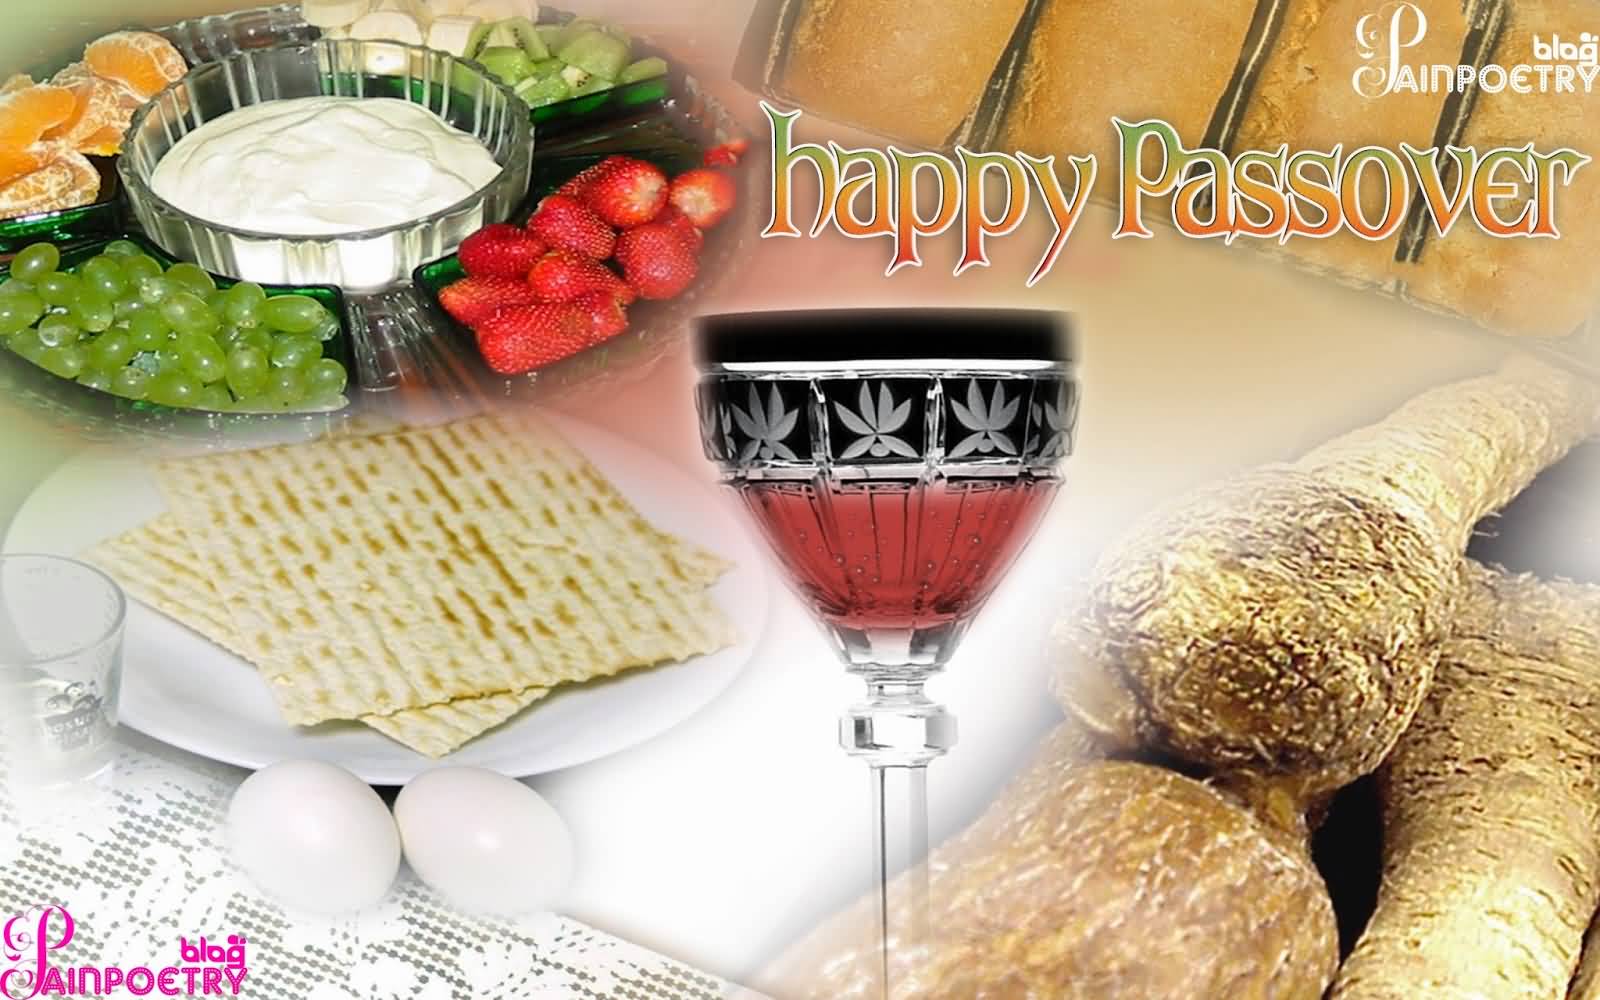 Happy Passover Wishes With Seder Items